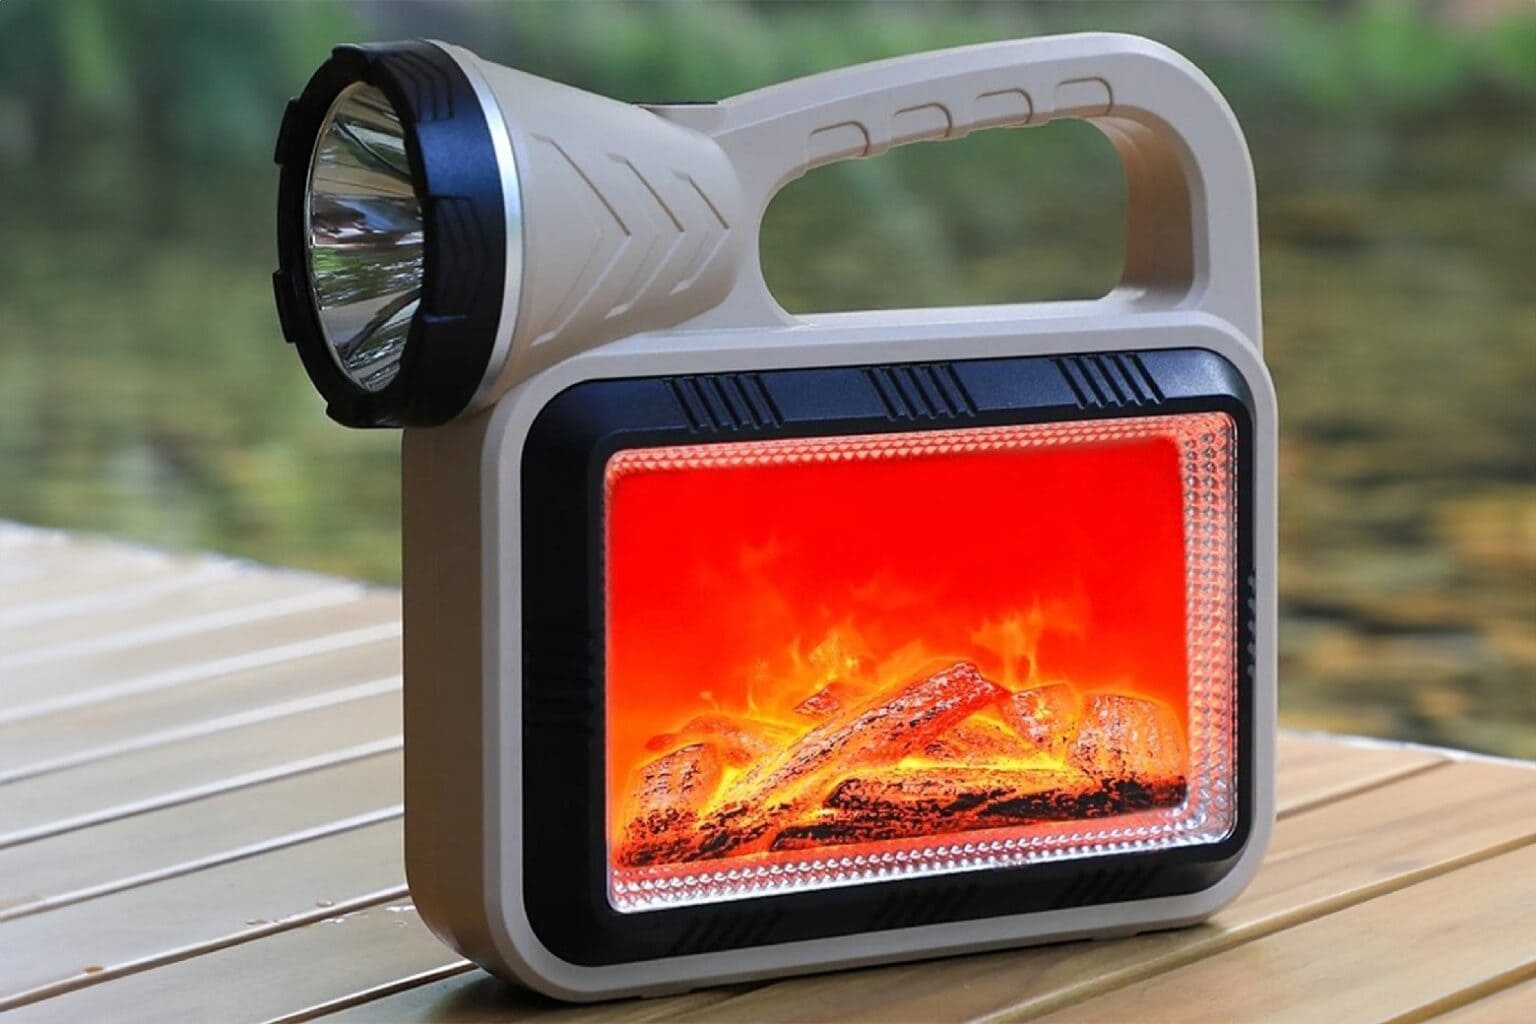 This solar-powered flashlight doubles as a power bank and lights up the night with faux fireplace.